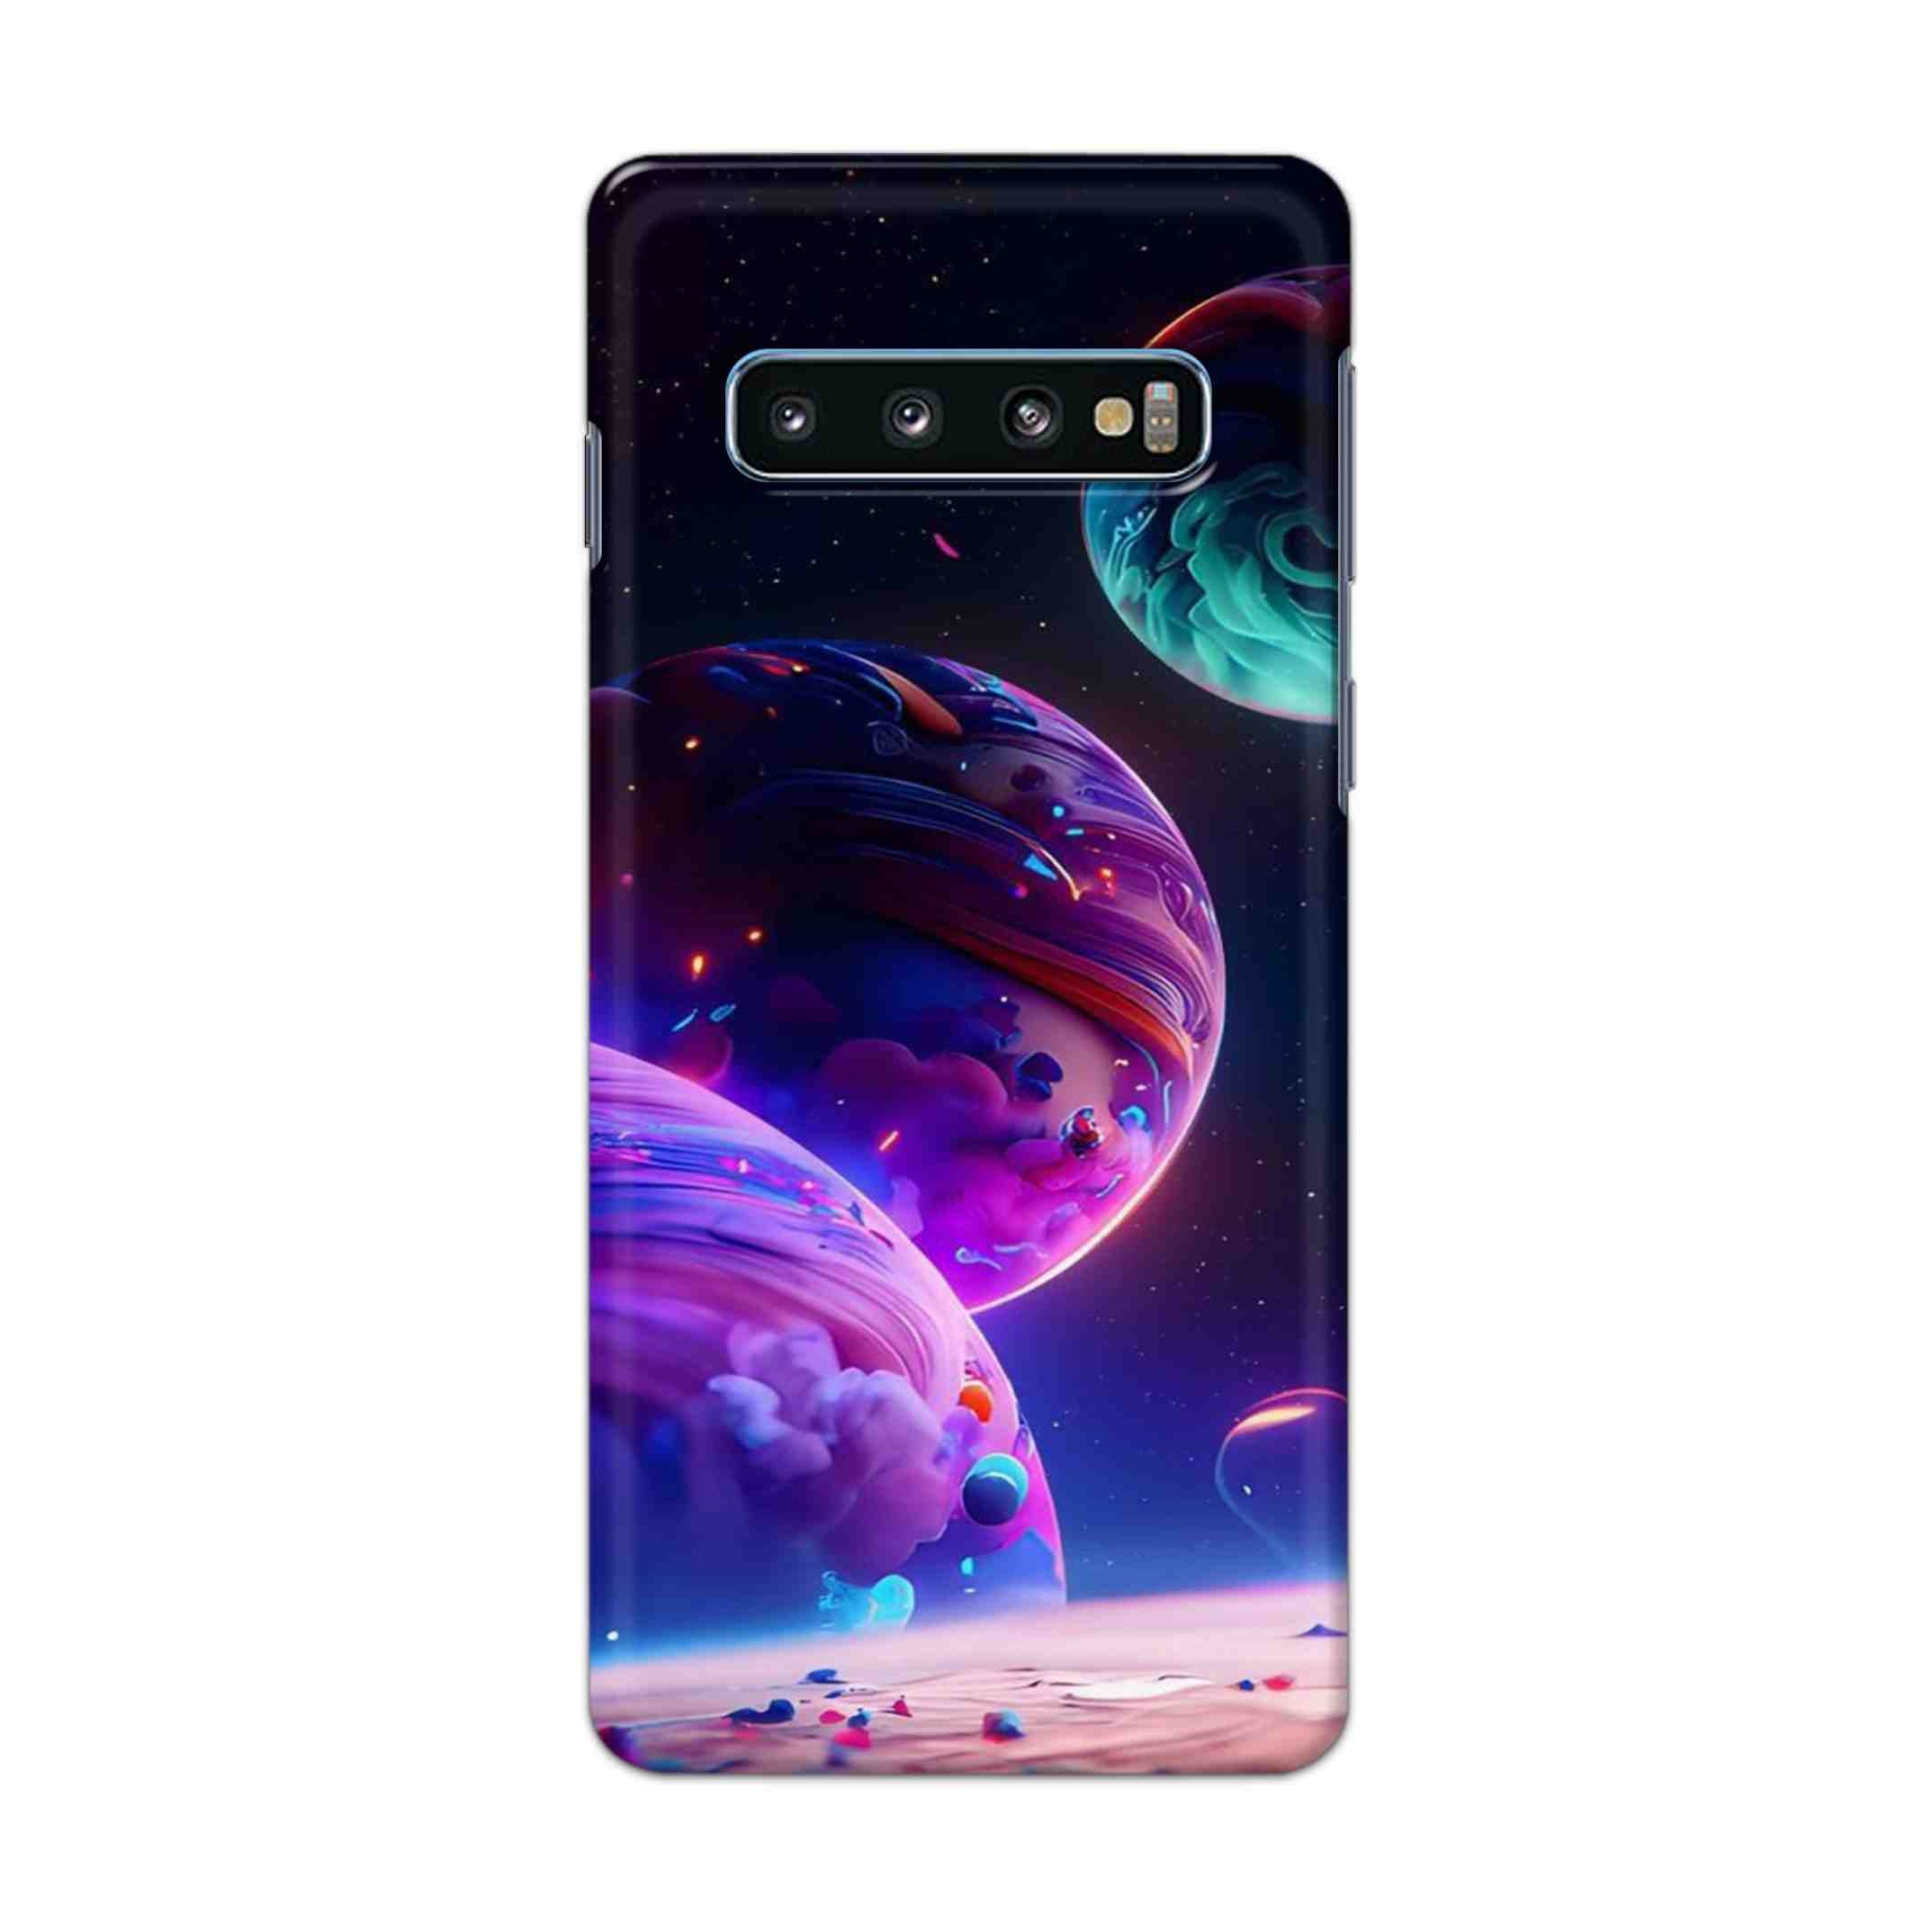 Buy 3 Earth Hard Back Mobile Phone Case Cover For Samsung Galaxy S10 Plus Online